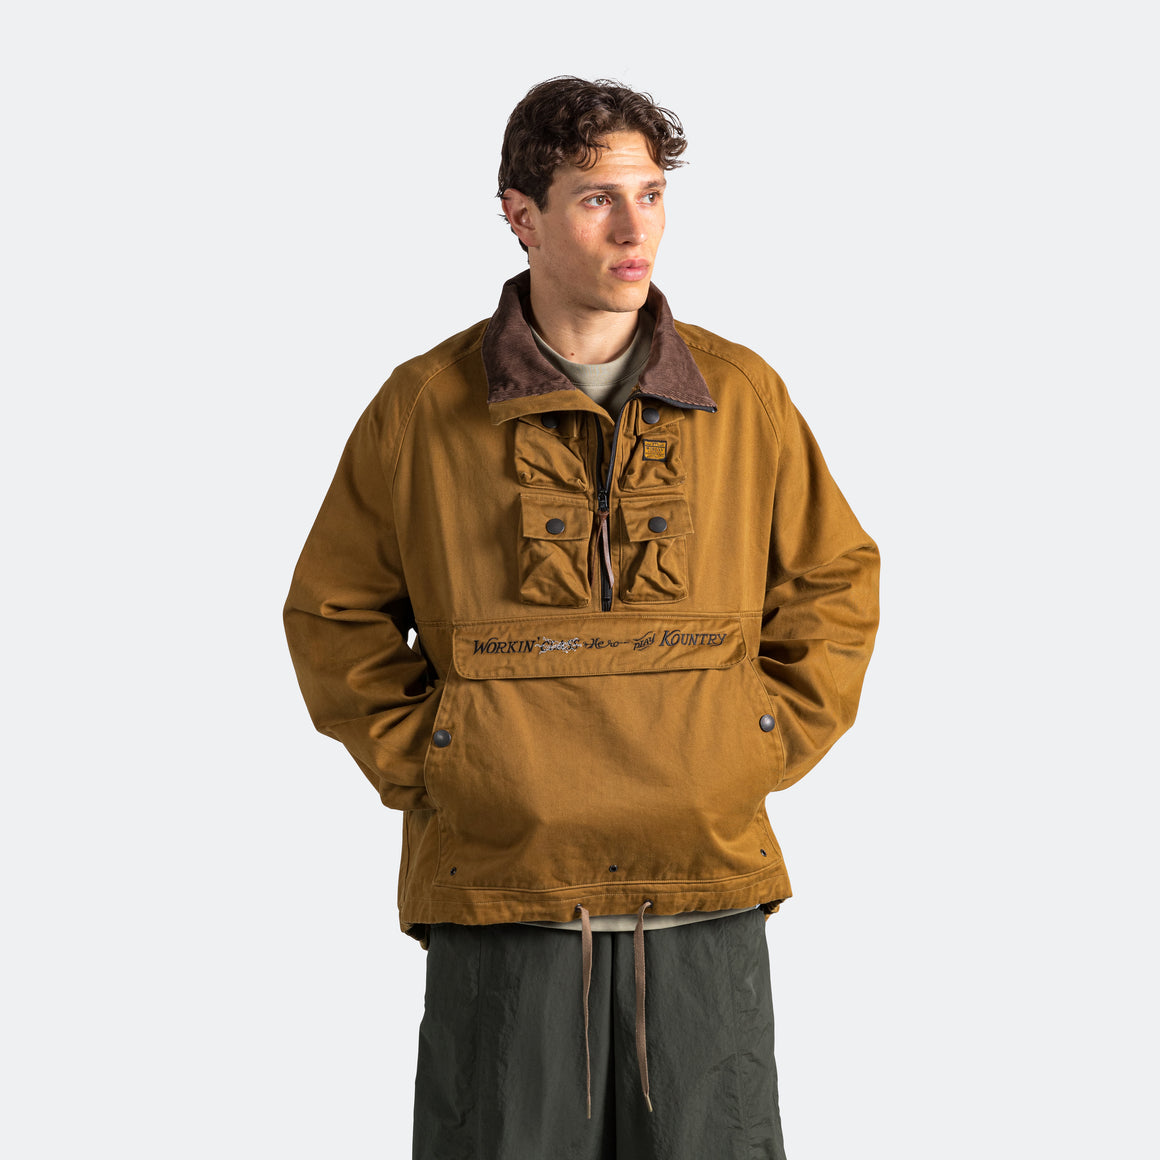 Chino NICKLE 6 Anorak(WORKING Embroidery) - Camel/Navy